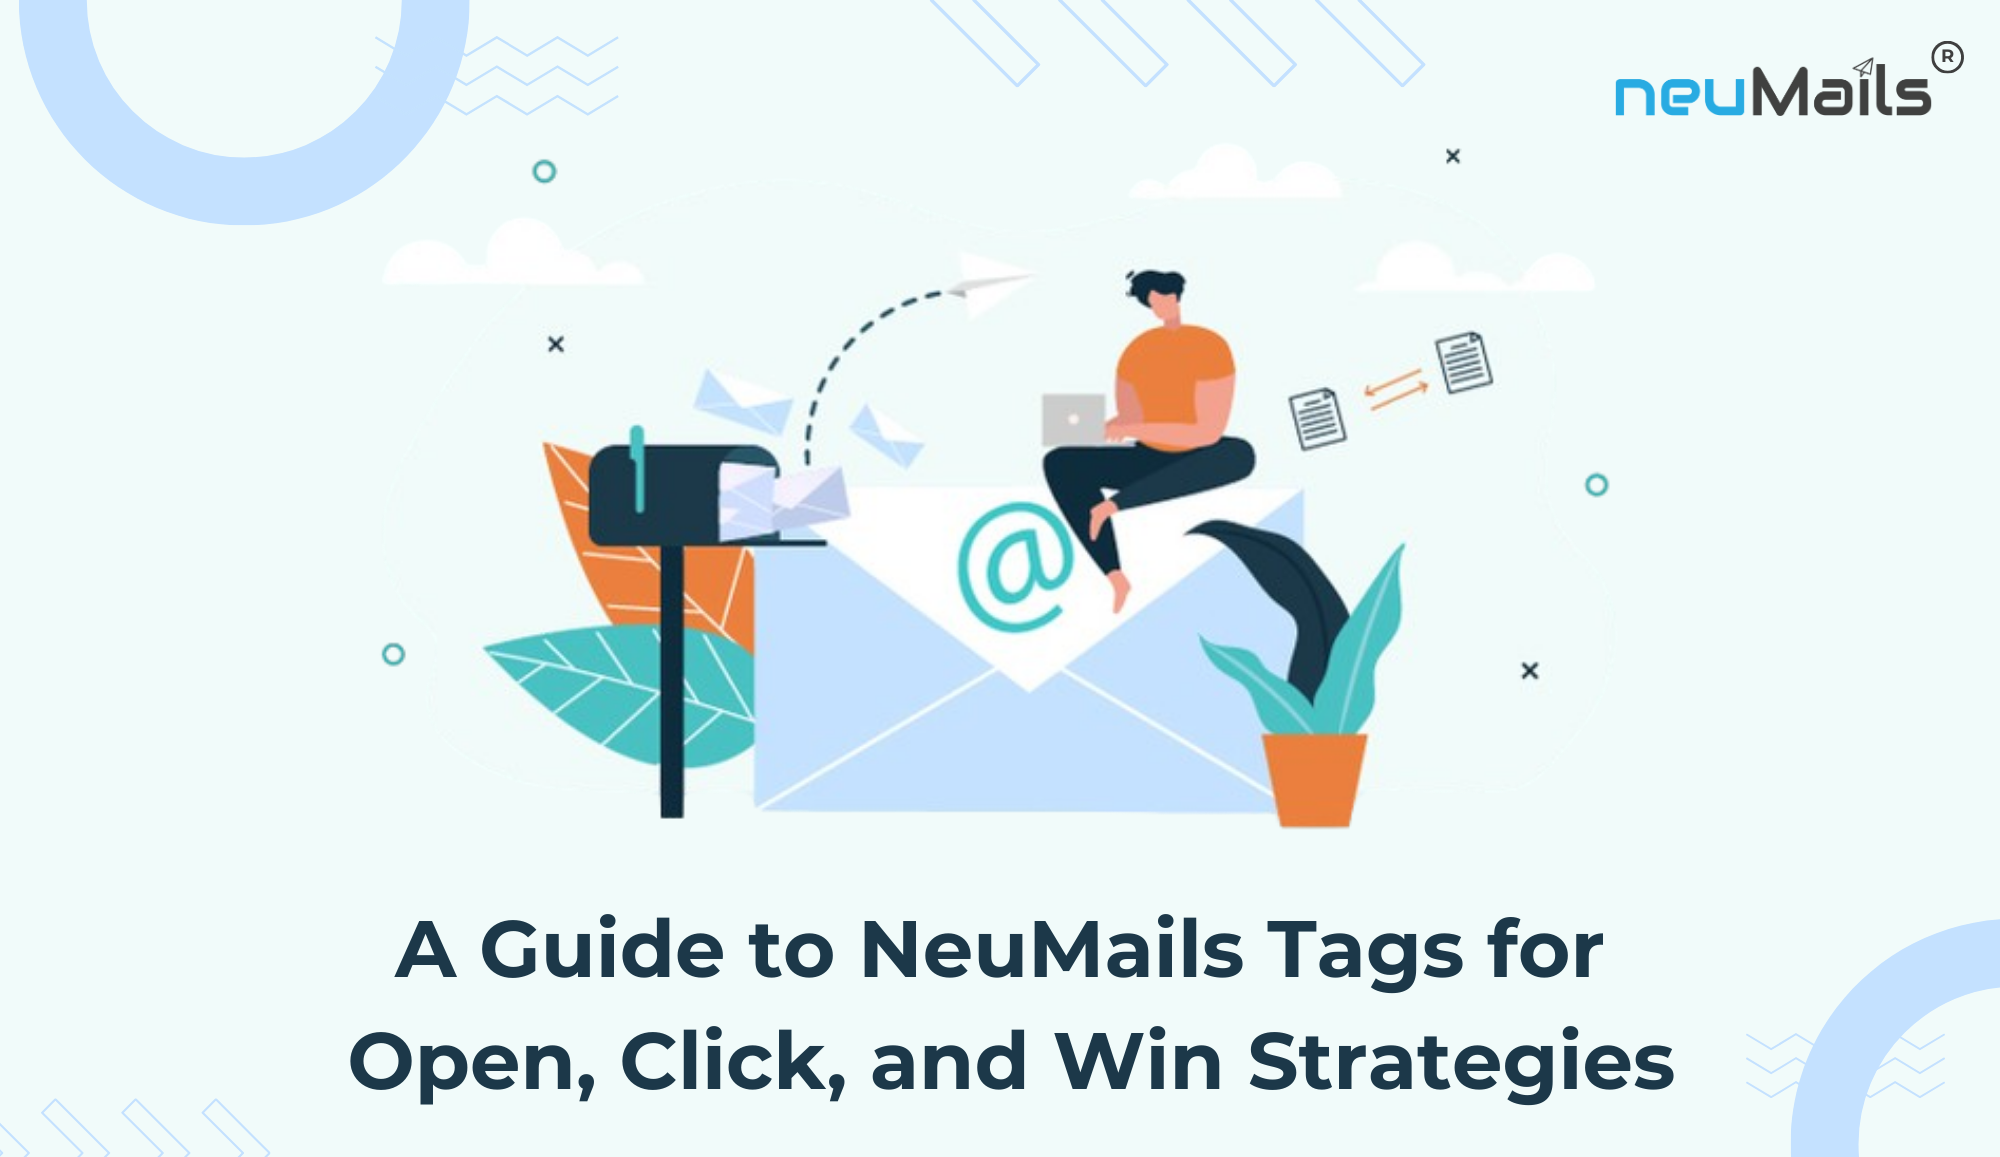 open click win strategies with neumails